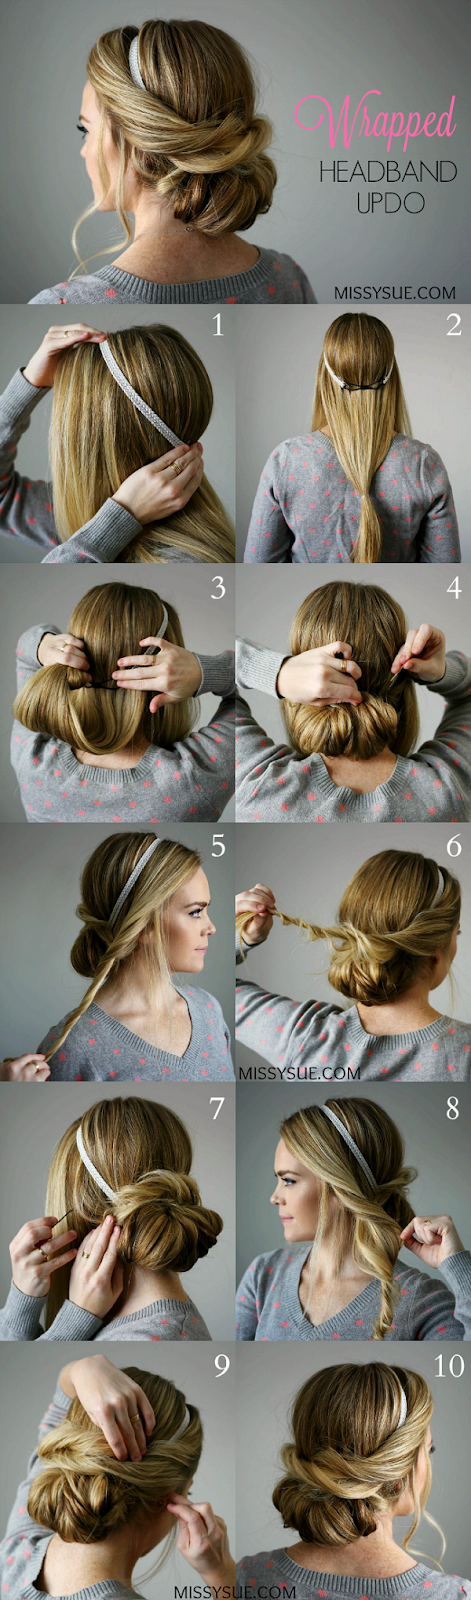 10 EASY HAIRSTYLES FOR LONG HAIR - It's your life